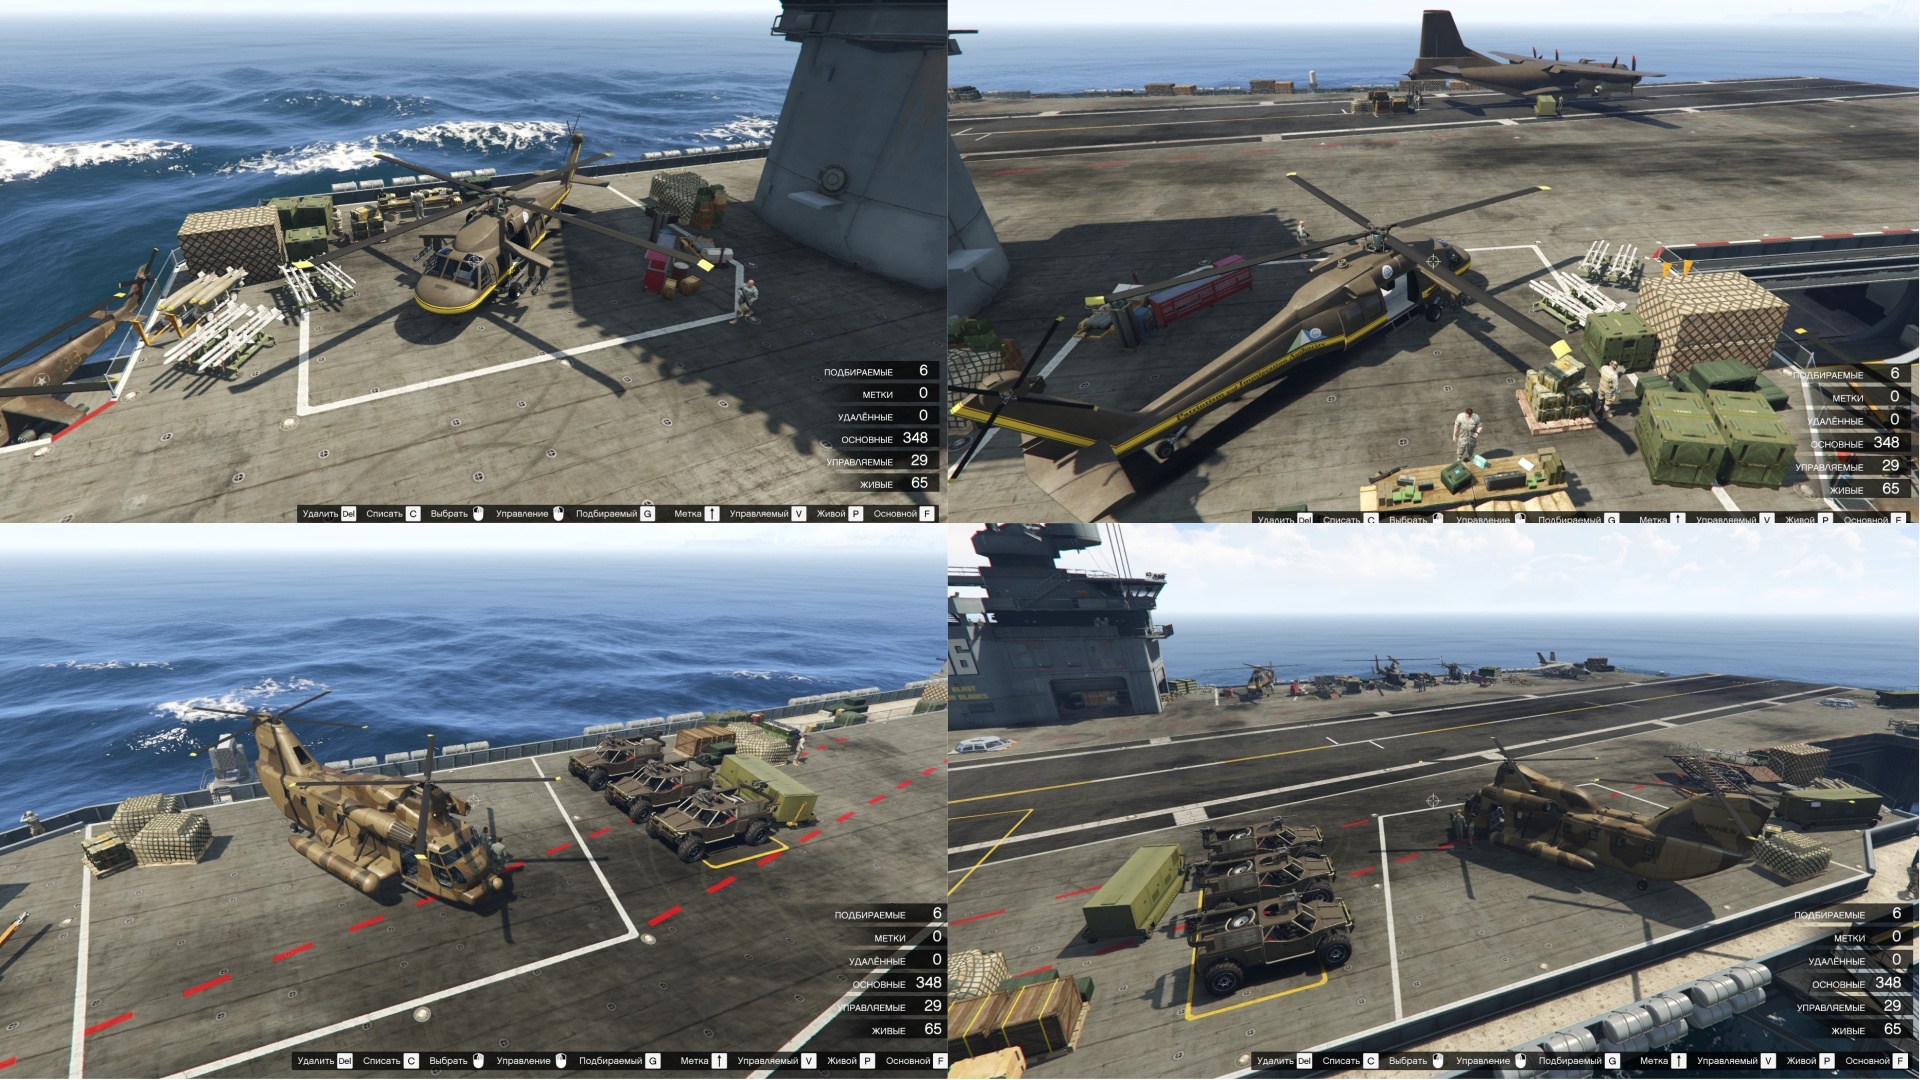 Gta 5 Aircraft Carrier Location | Digital Games and Software